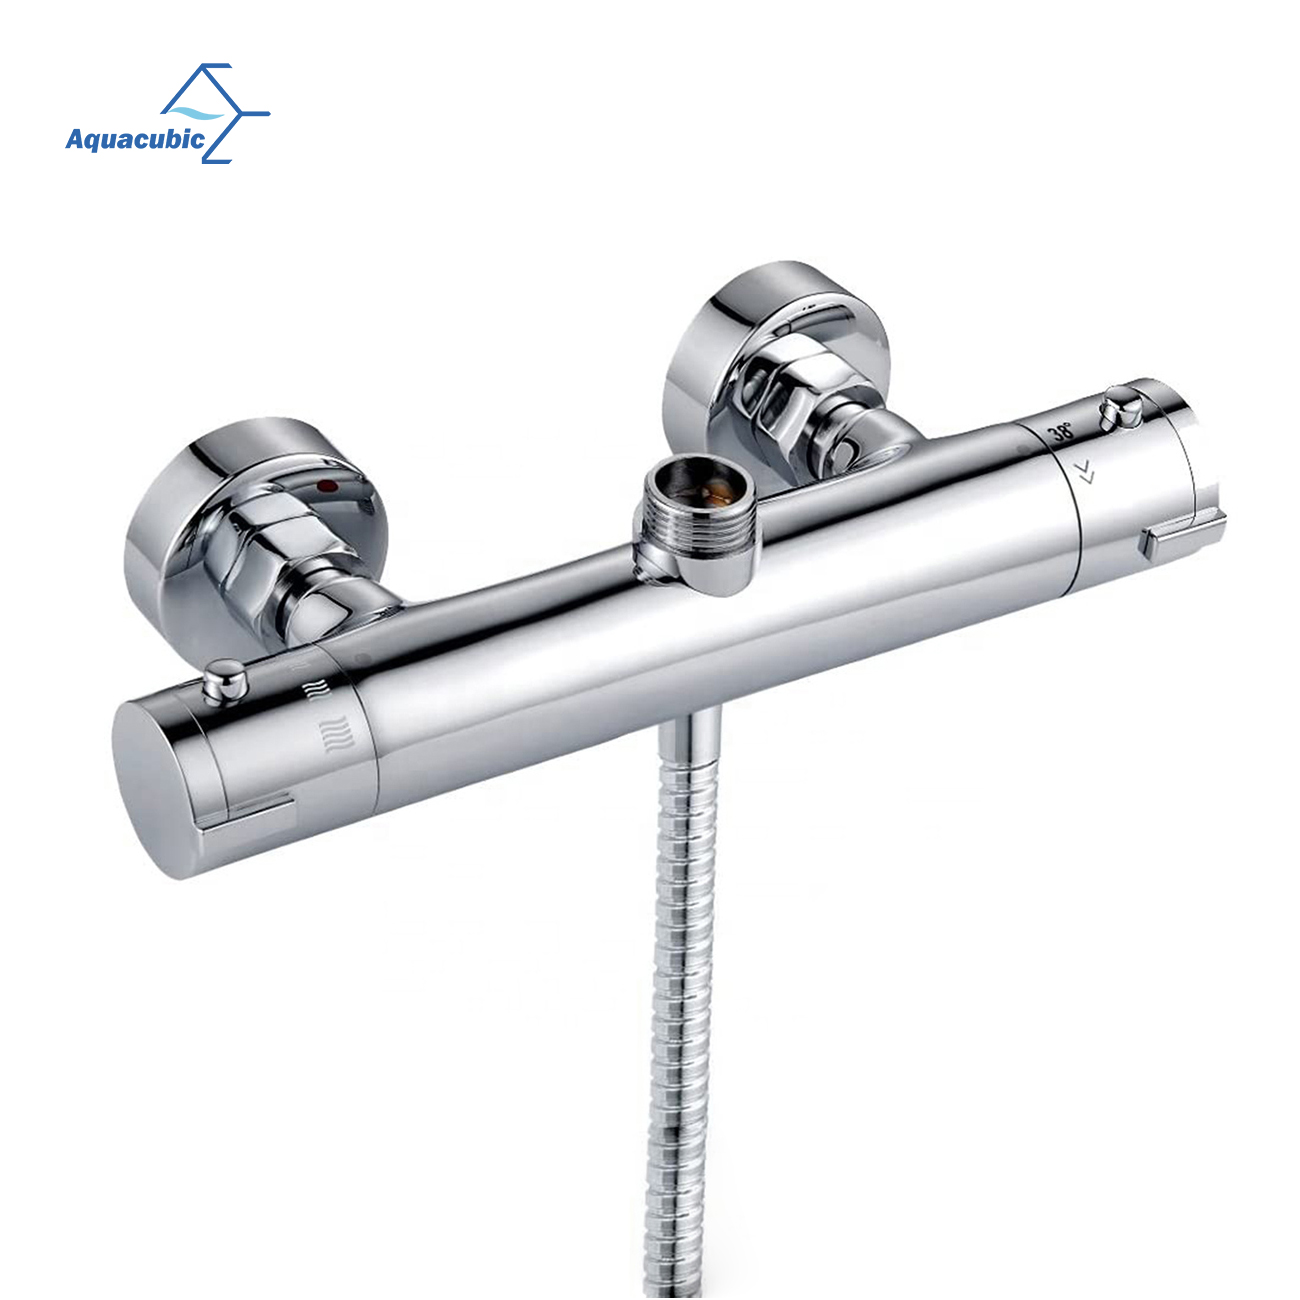 Aquacubic WRAS cUPC Wall Mount Thermostatic Shower Bathroom Water Tap Valve with NPT Thread US Standard